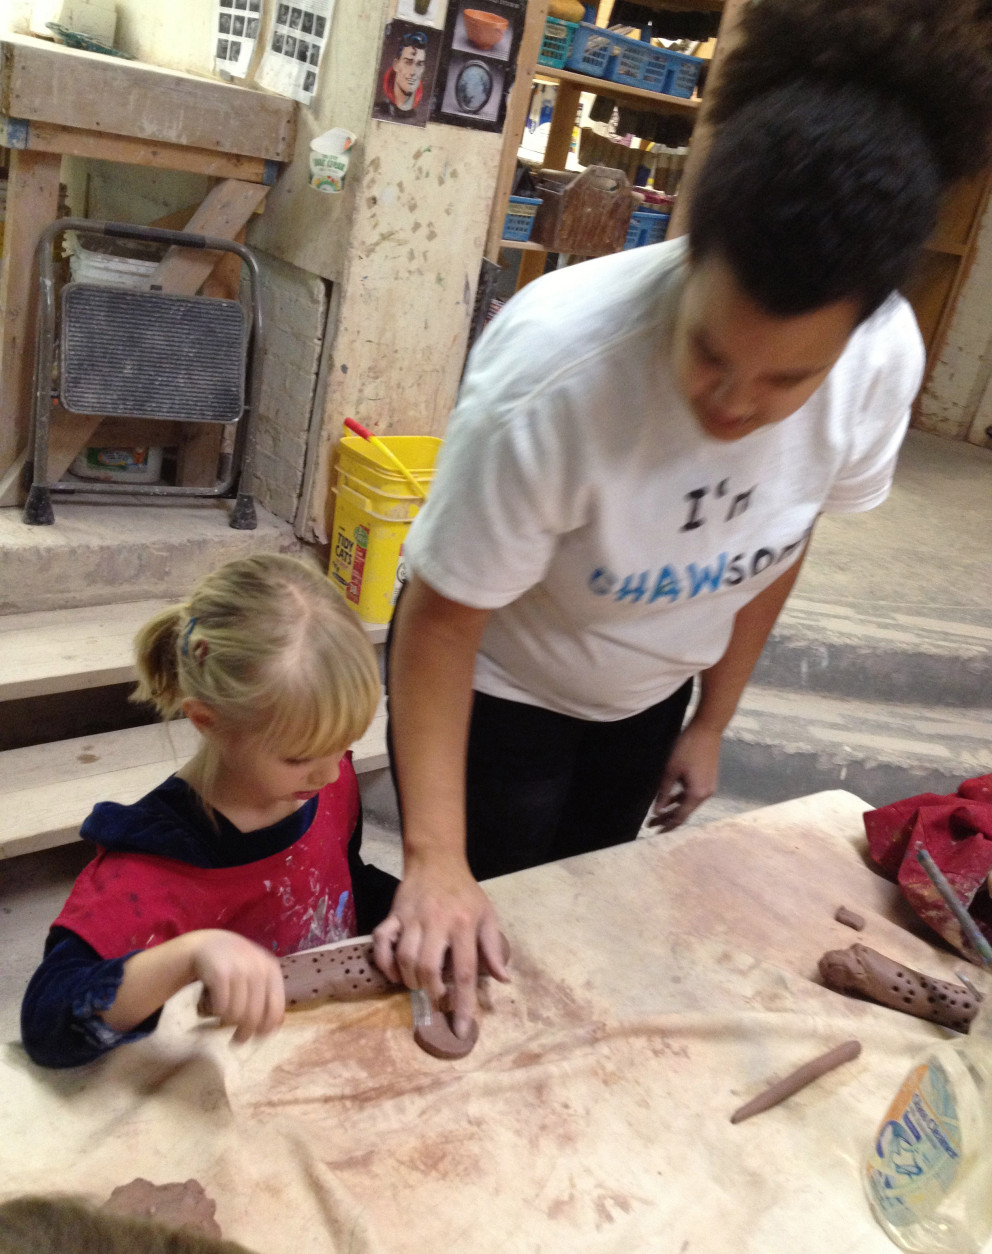 A young student learns with clay. (Leslie Mansour/CHAW)